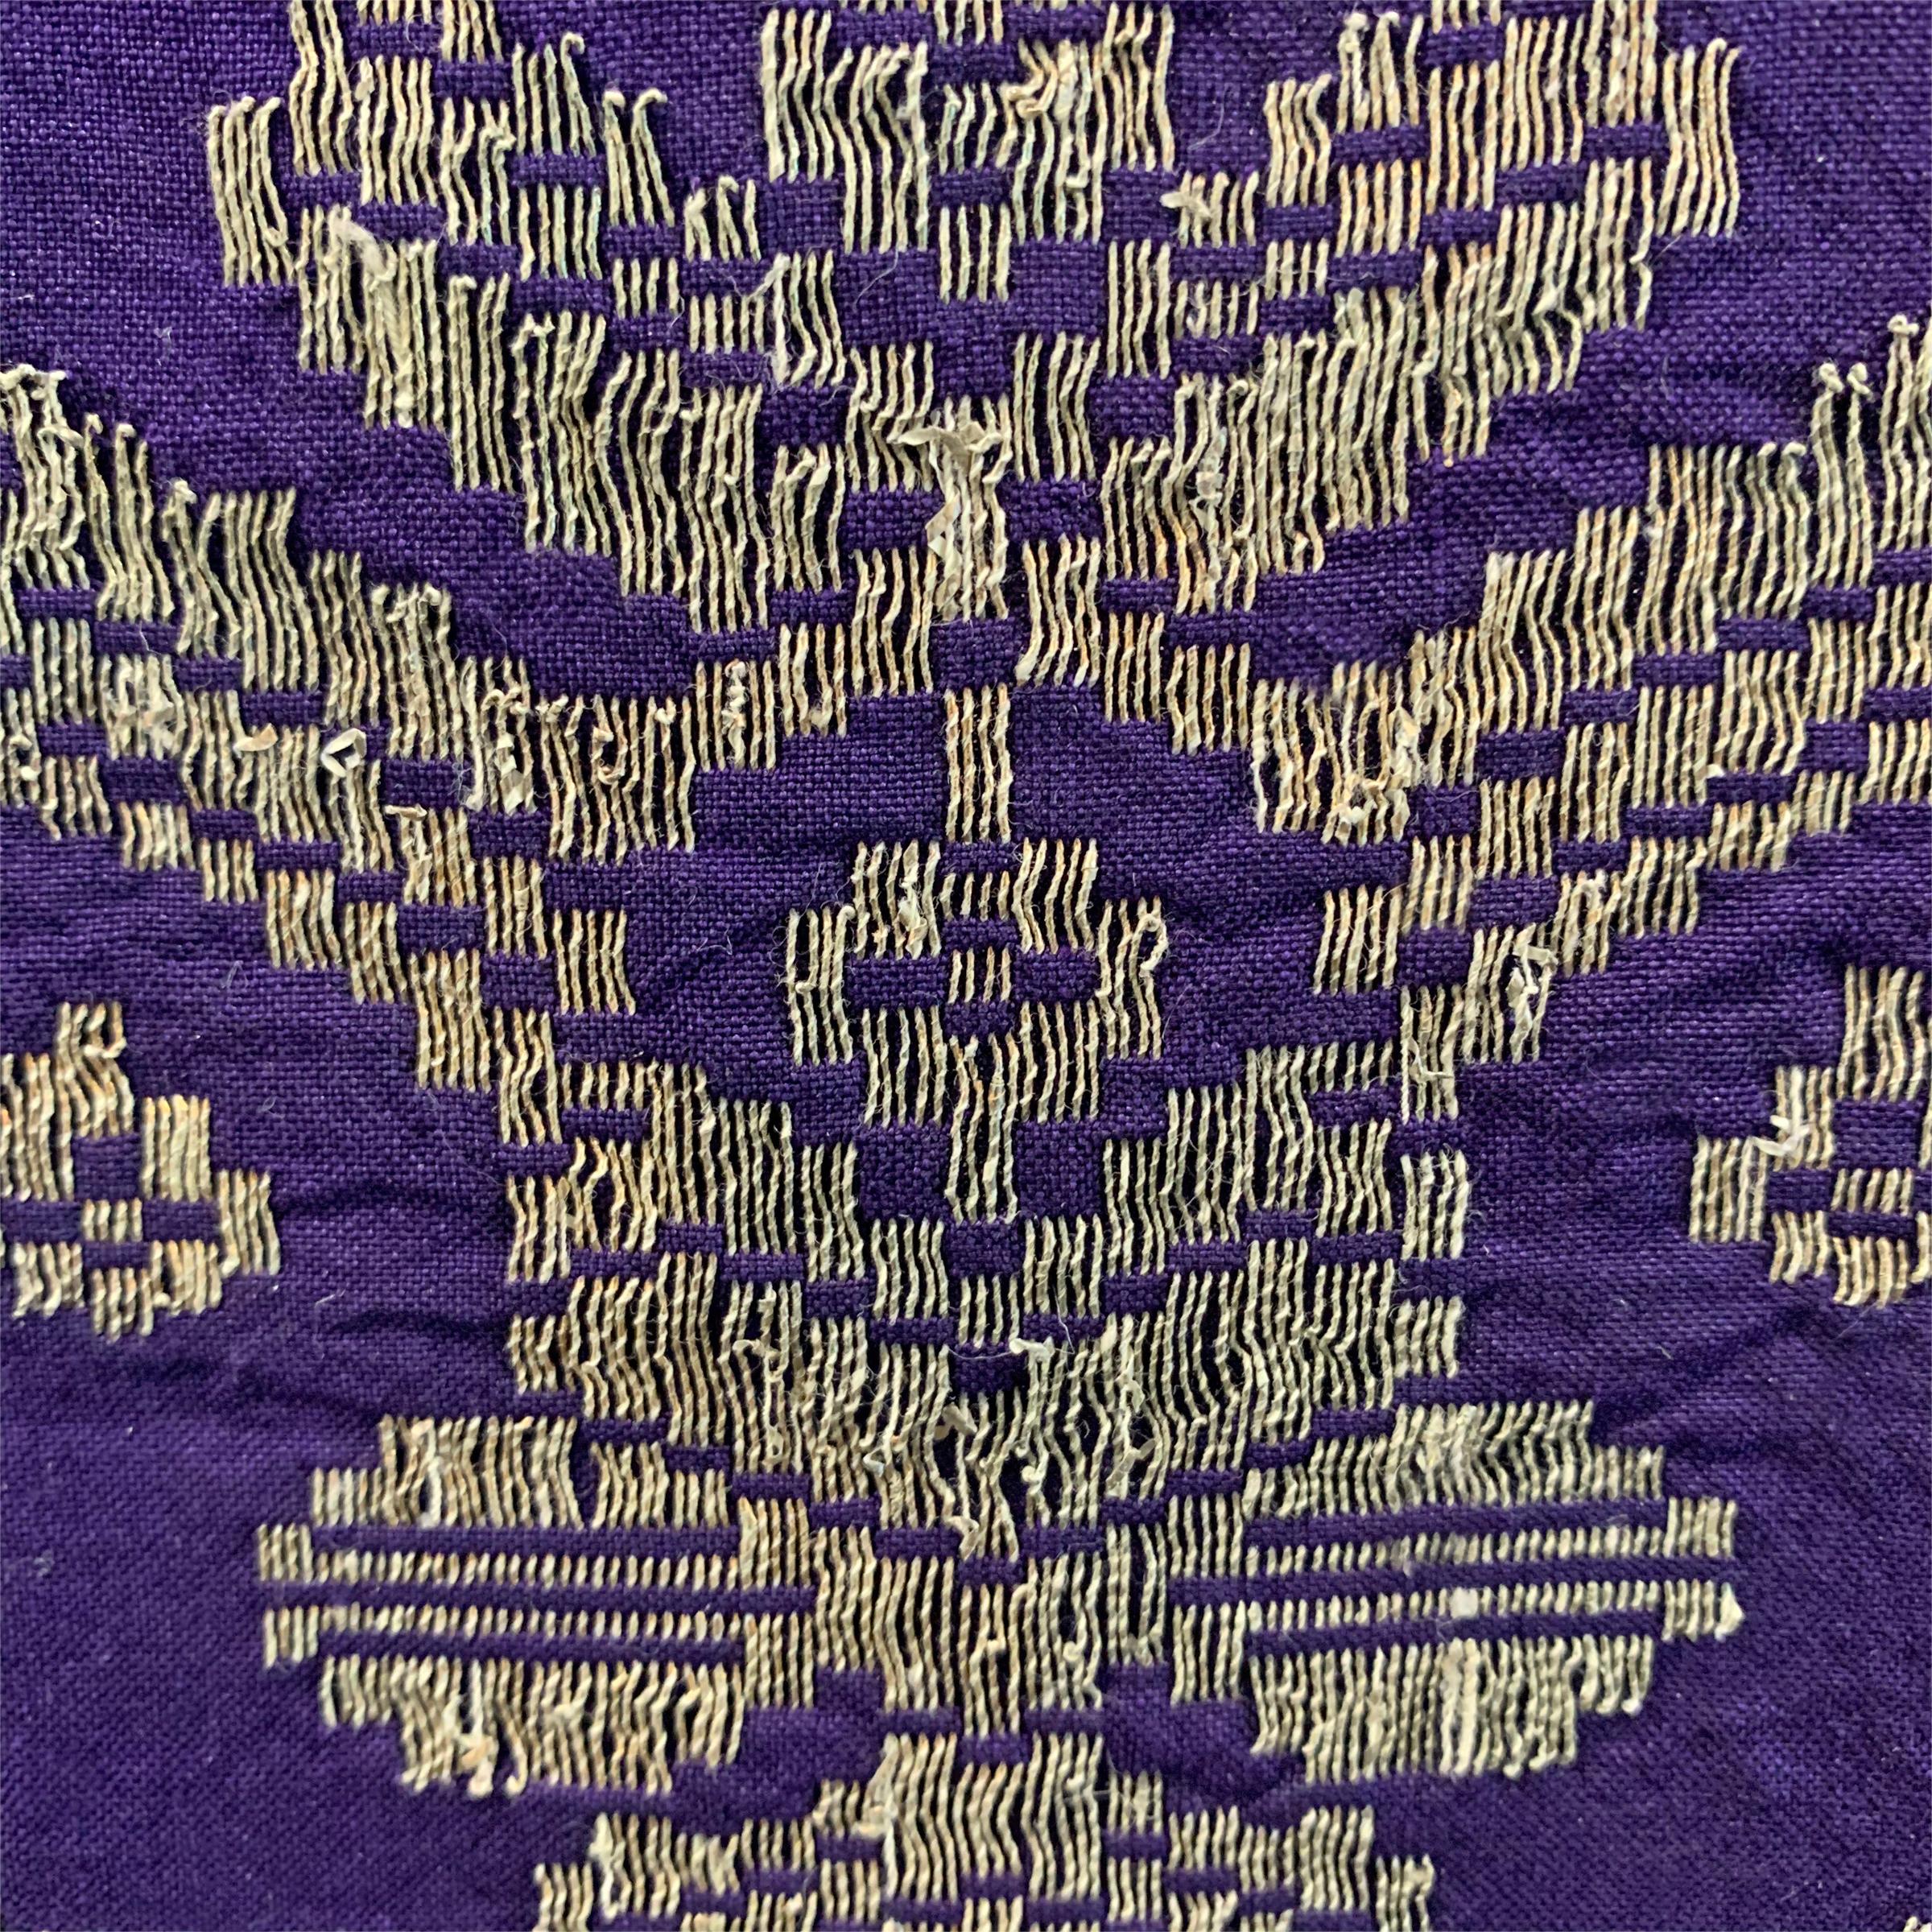 Mounted Early 20th Century Indonesian Textile 1